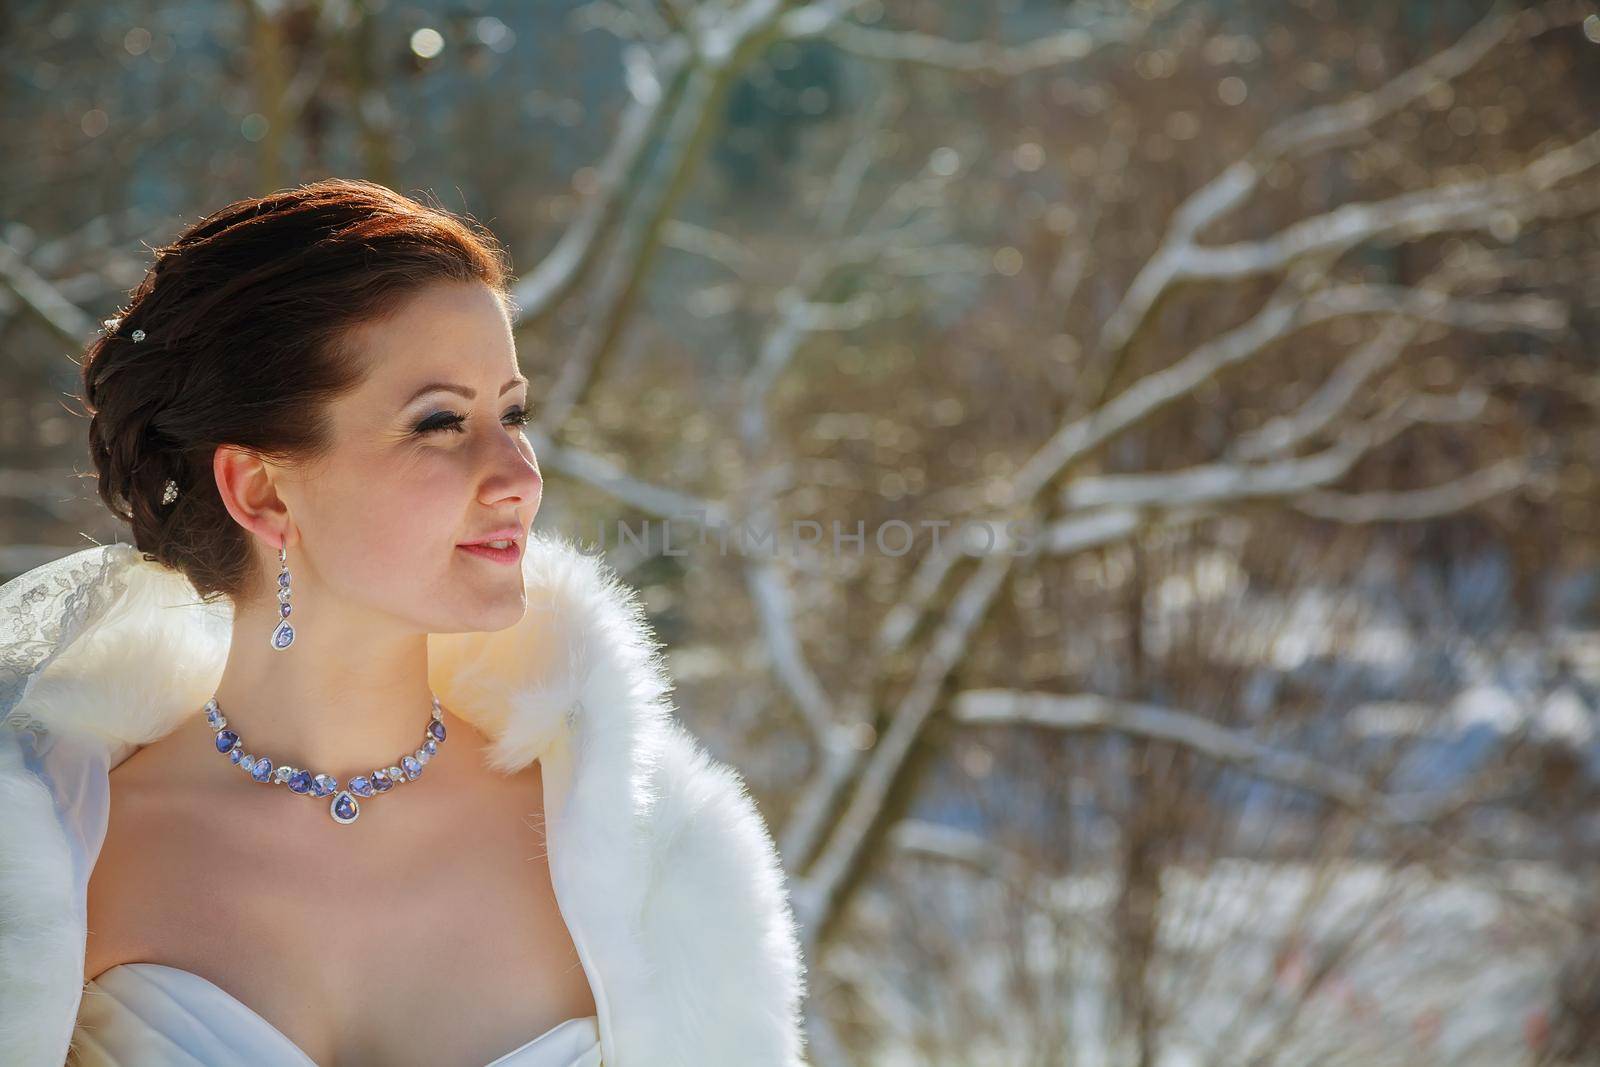 Bride in the winter against the backdrop of New York by ungvar